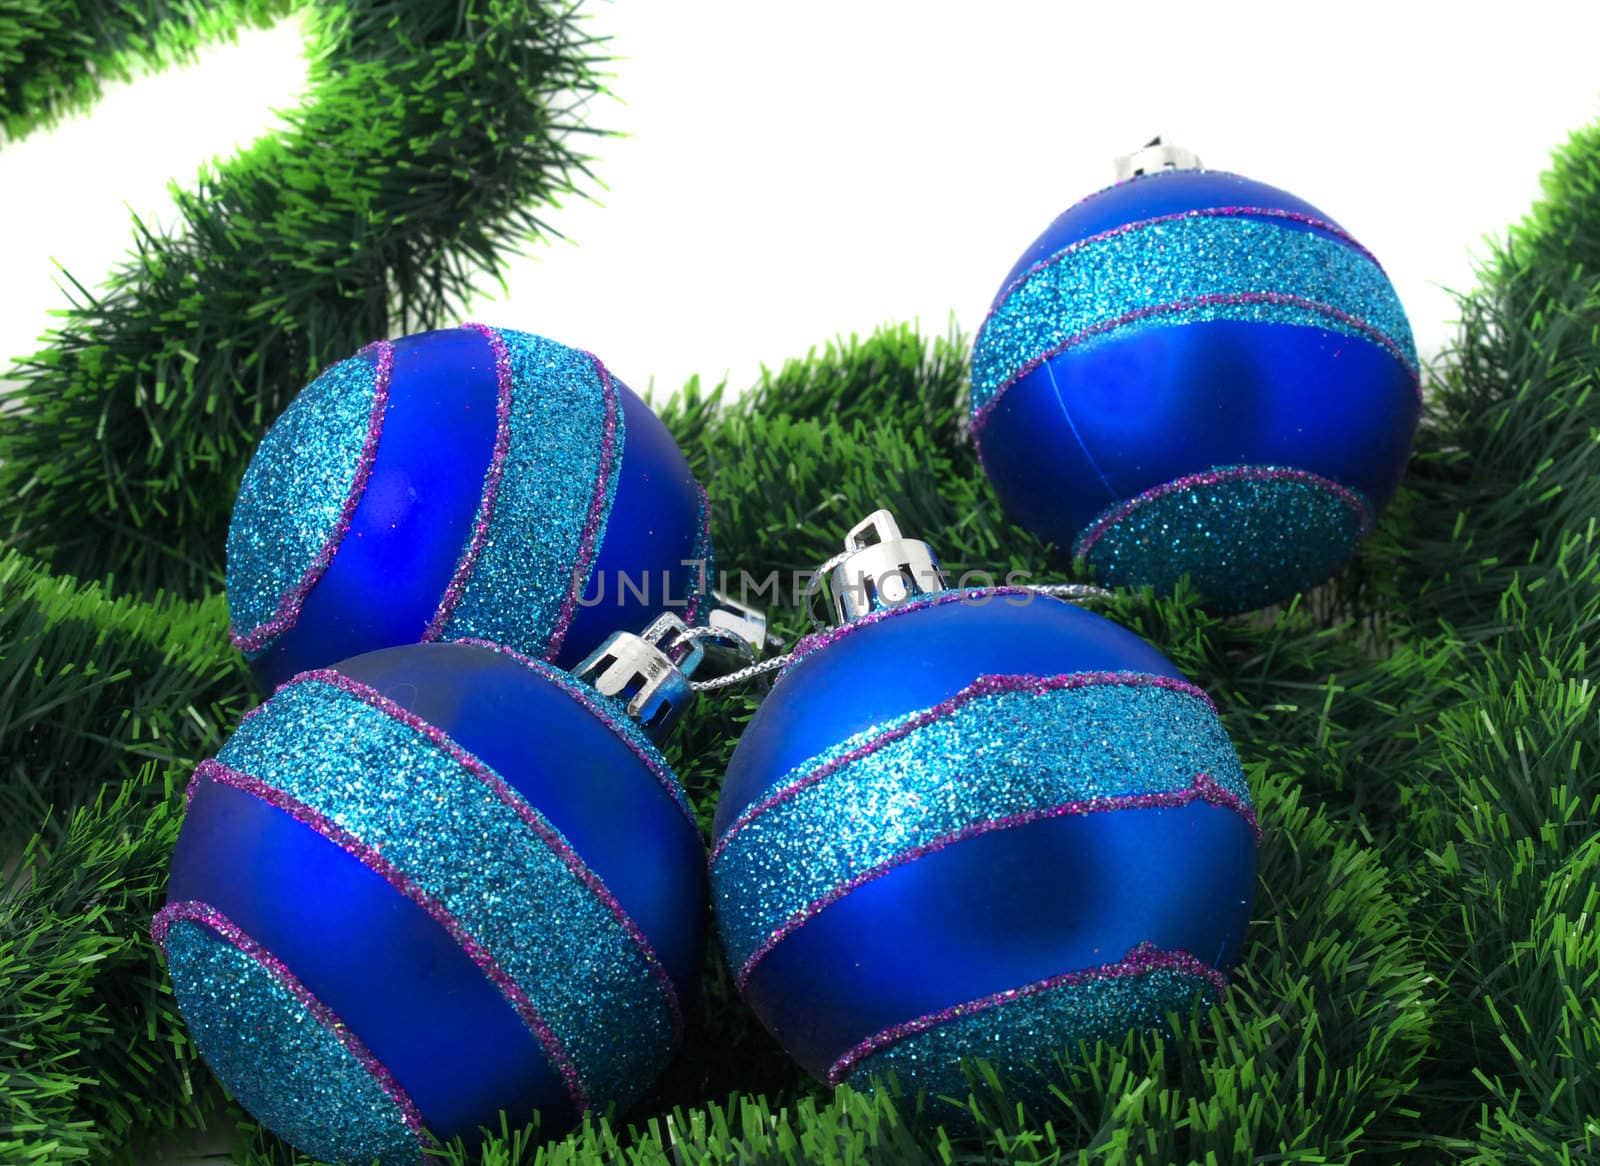 Christmas blue ornaments on white background